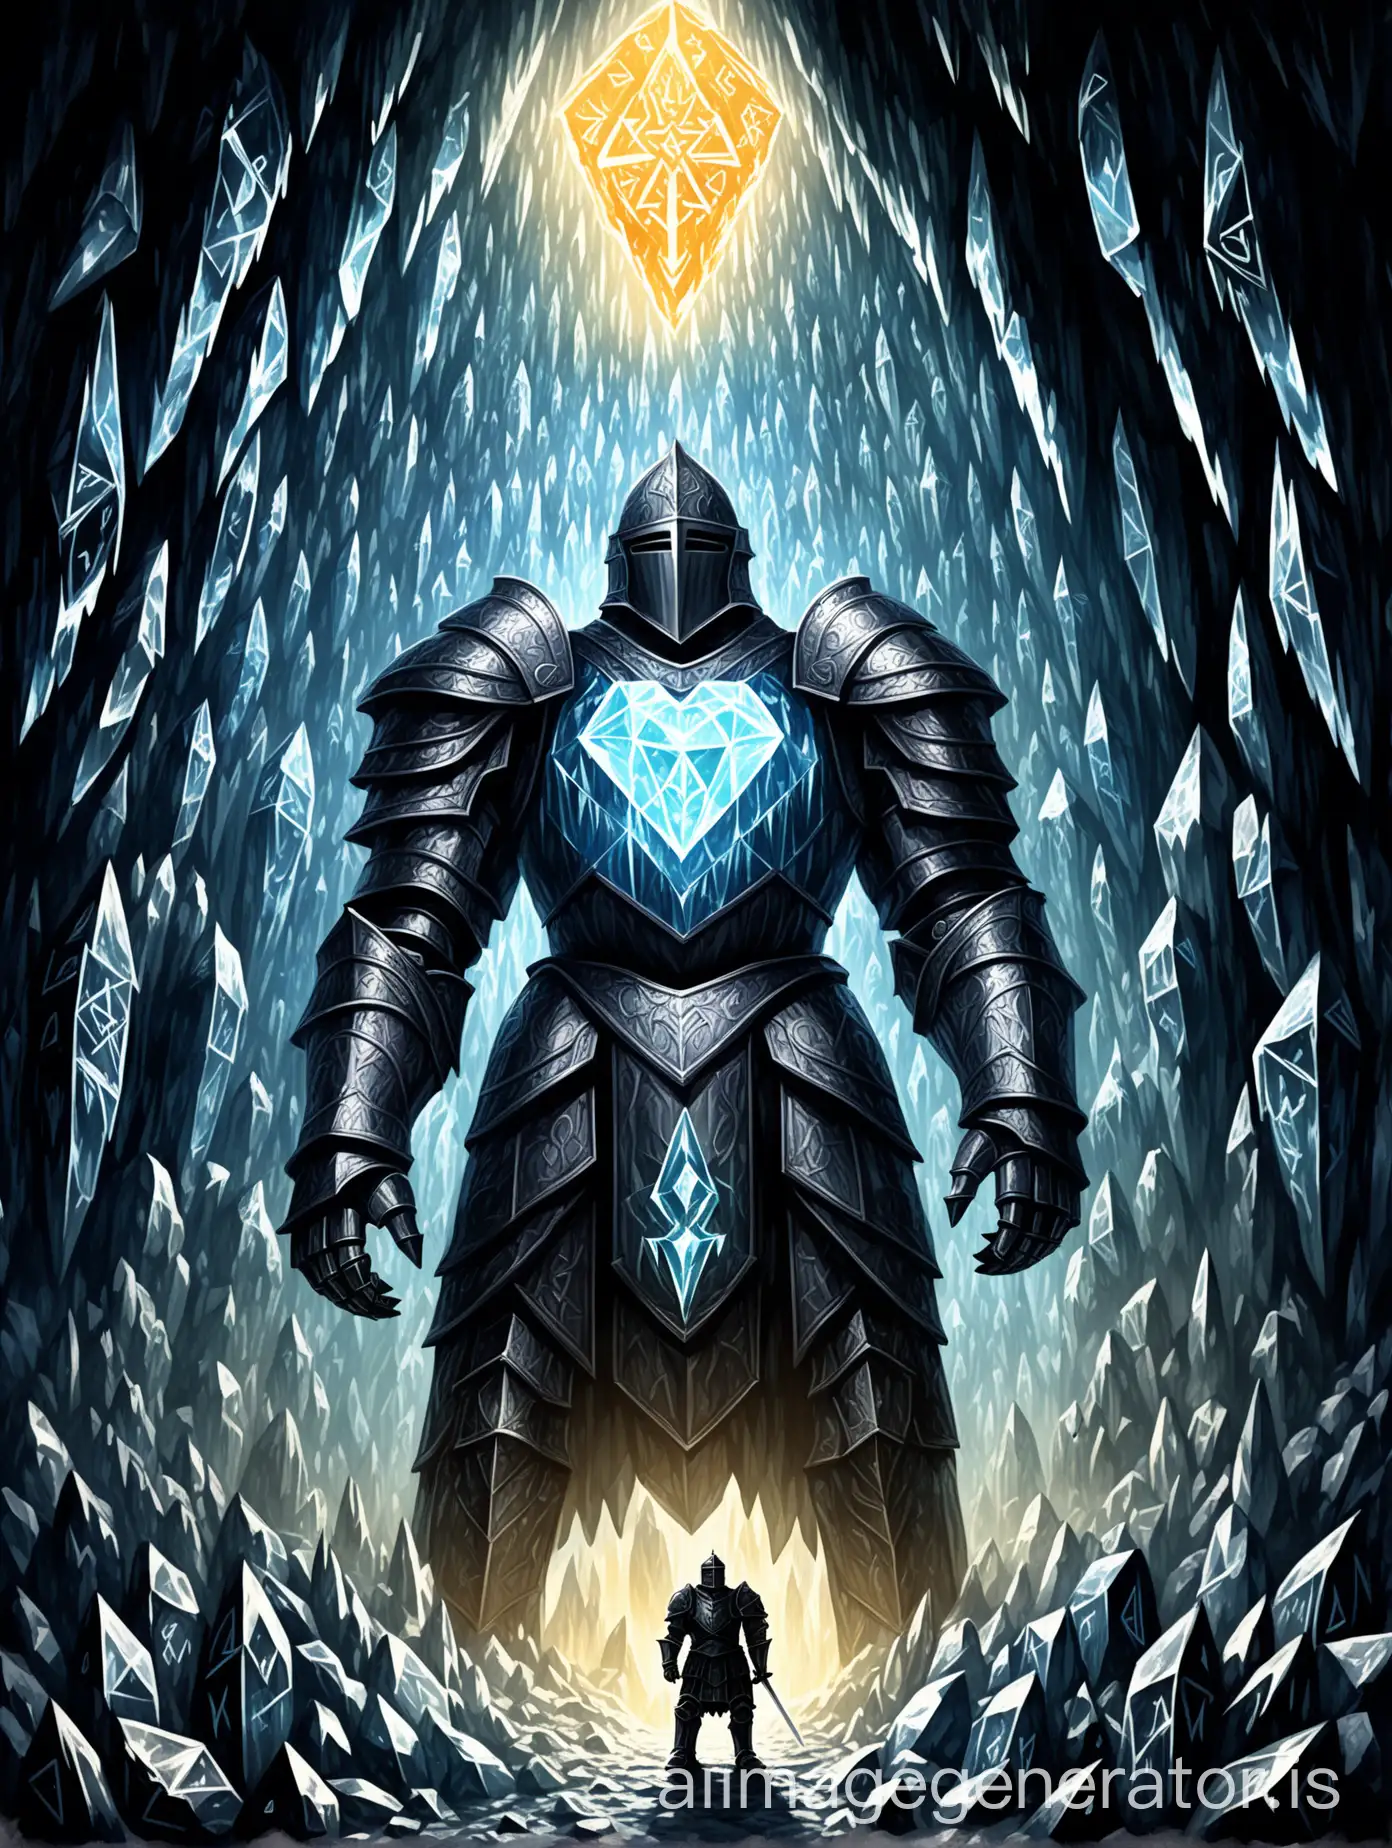 Stoic-Knight-Confronts-Crystal-Golem-in-Glittering-Cave